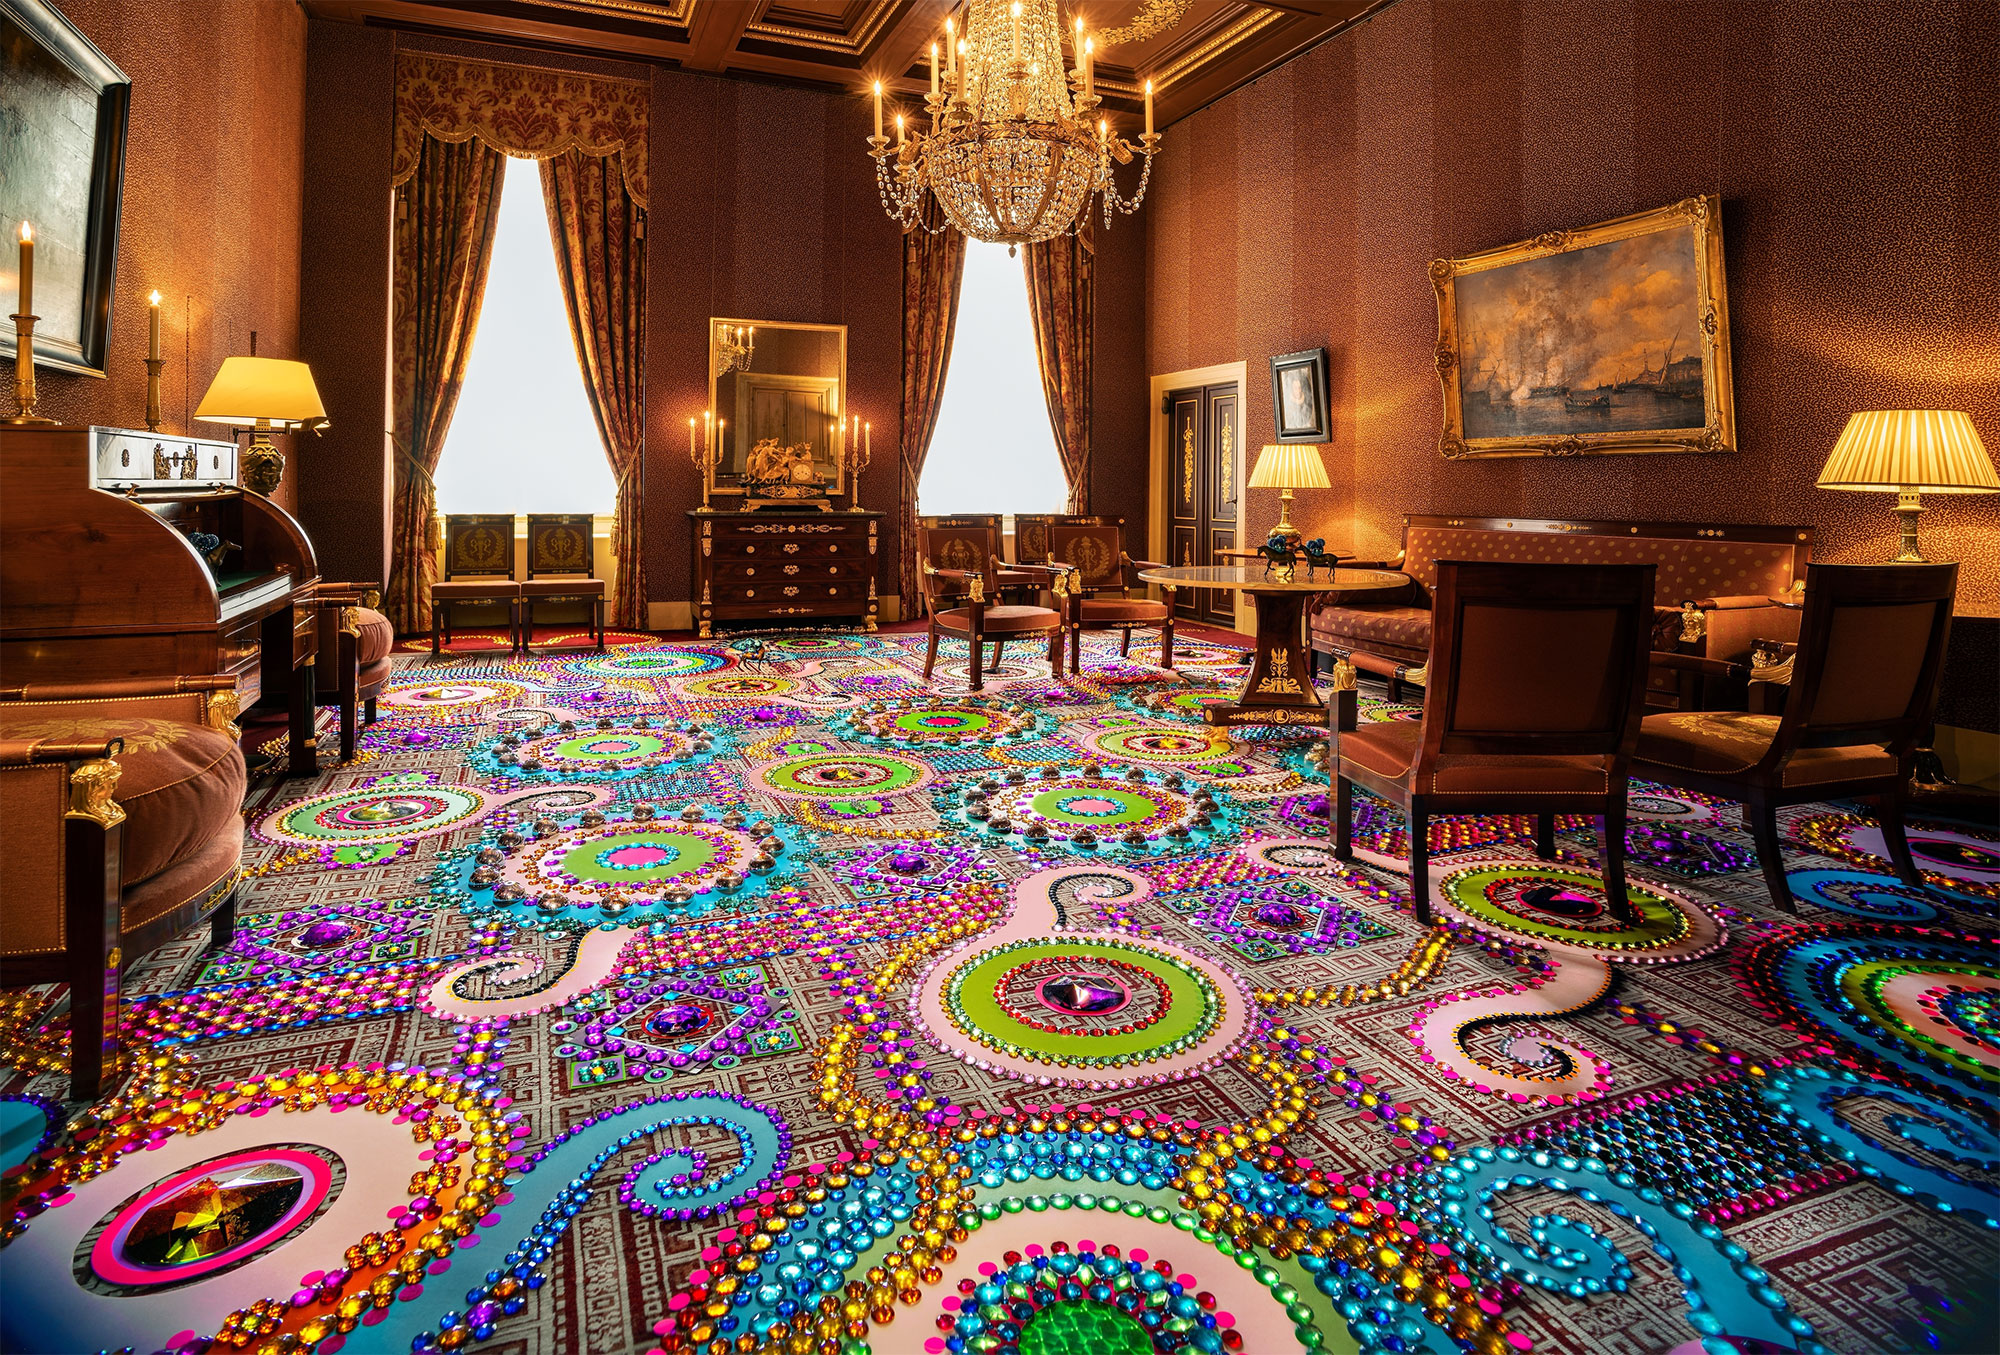 A Dizzying Carpet of Crystals Blankets a Salon in the Royal Palace Amsterdam with Prismatic Patterns